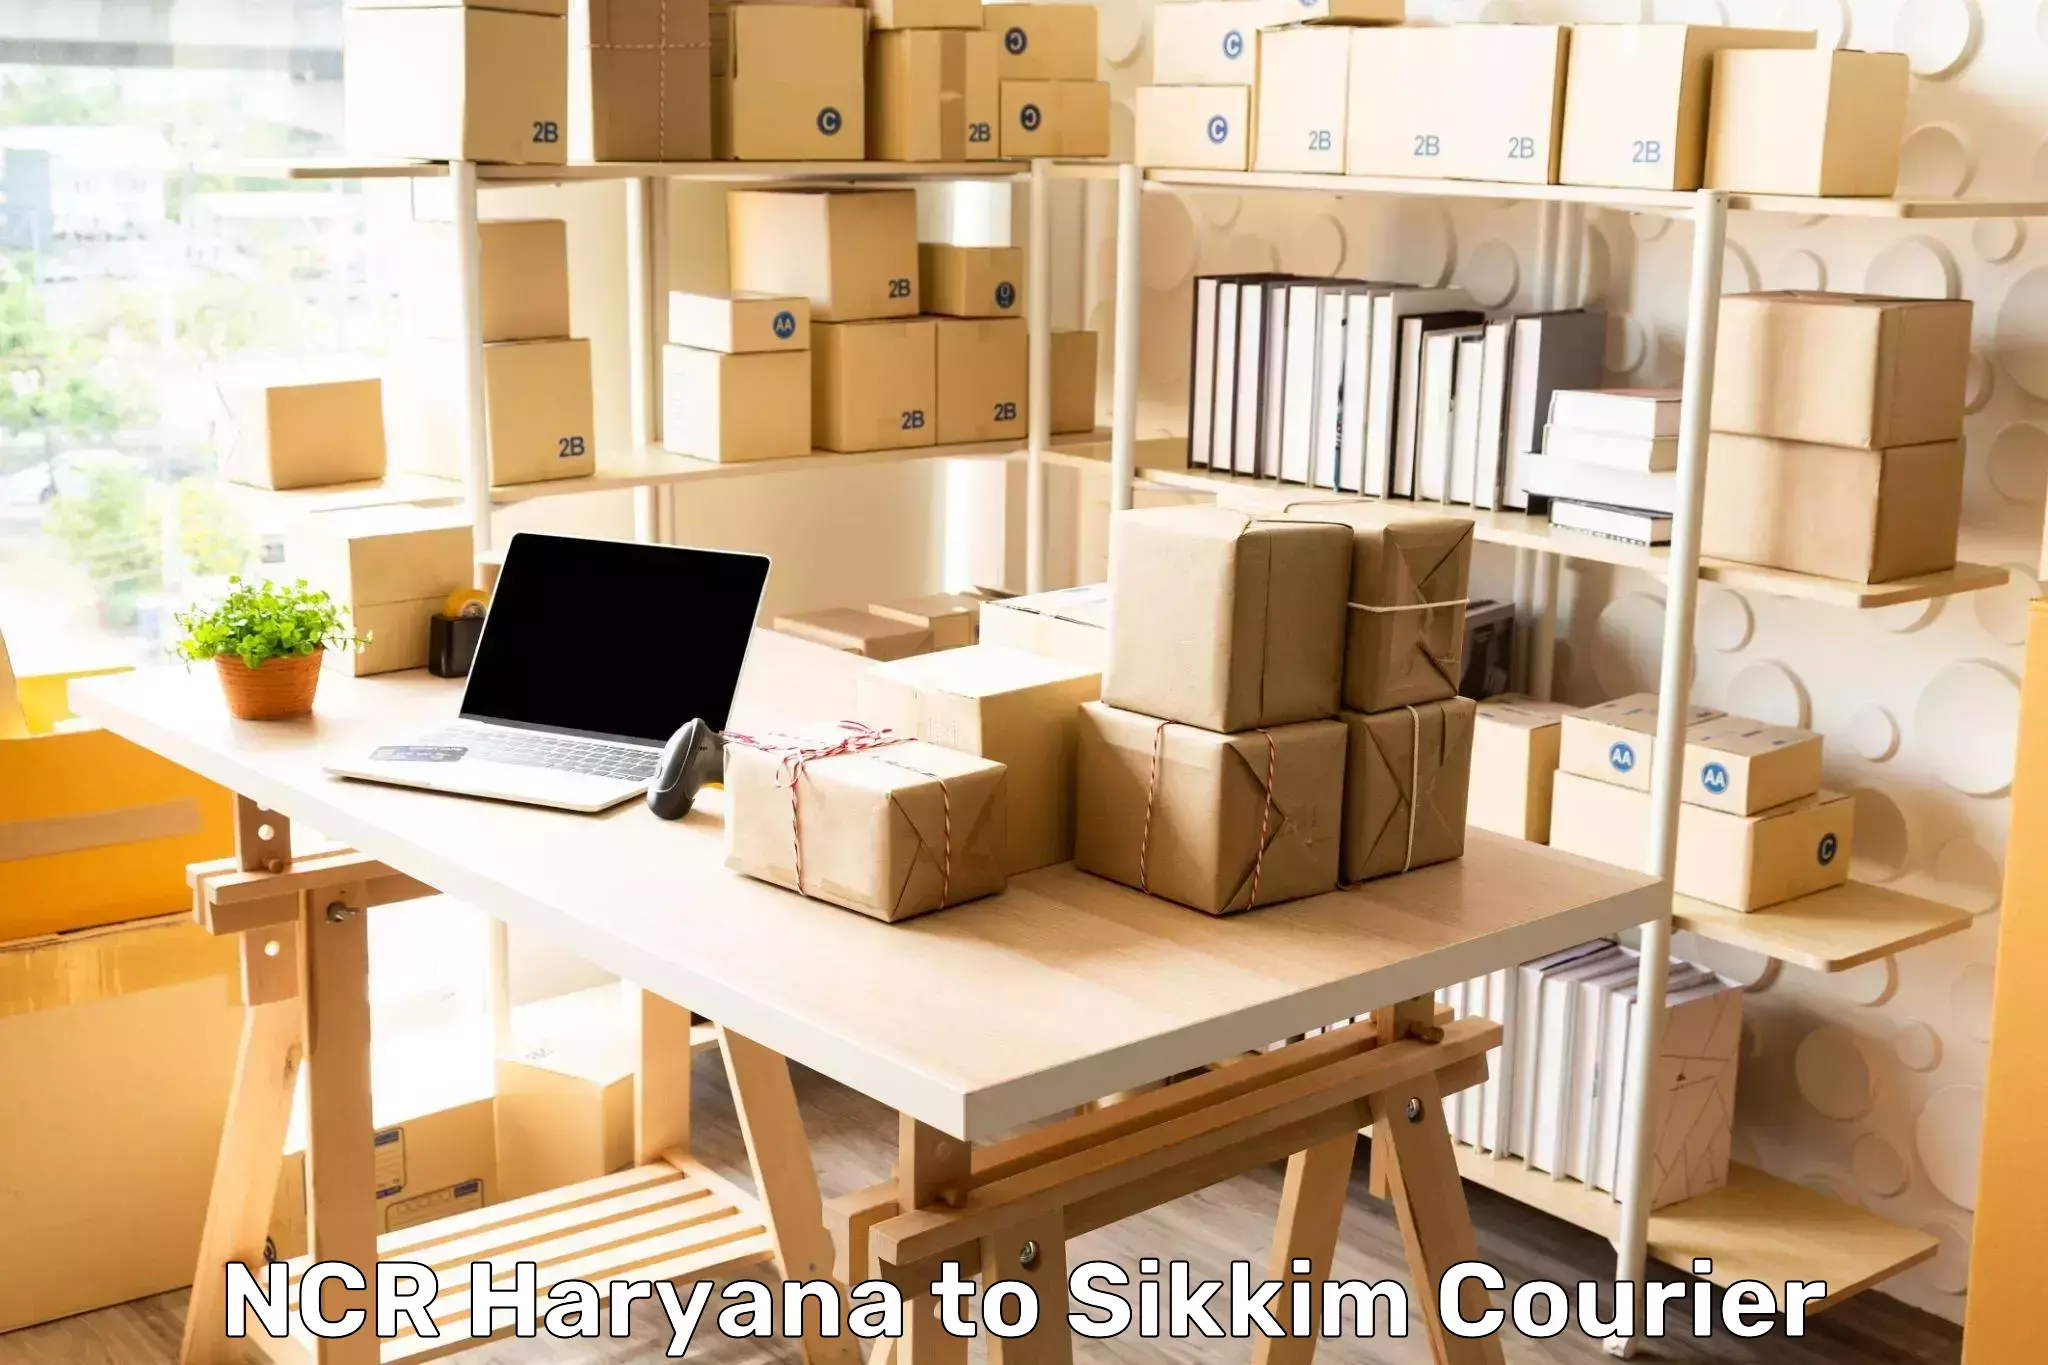 Cost-effective courier options NCR Haryana to South Sikkim